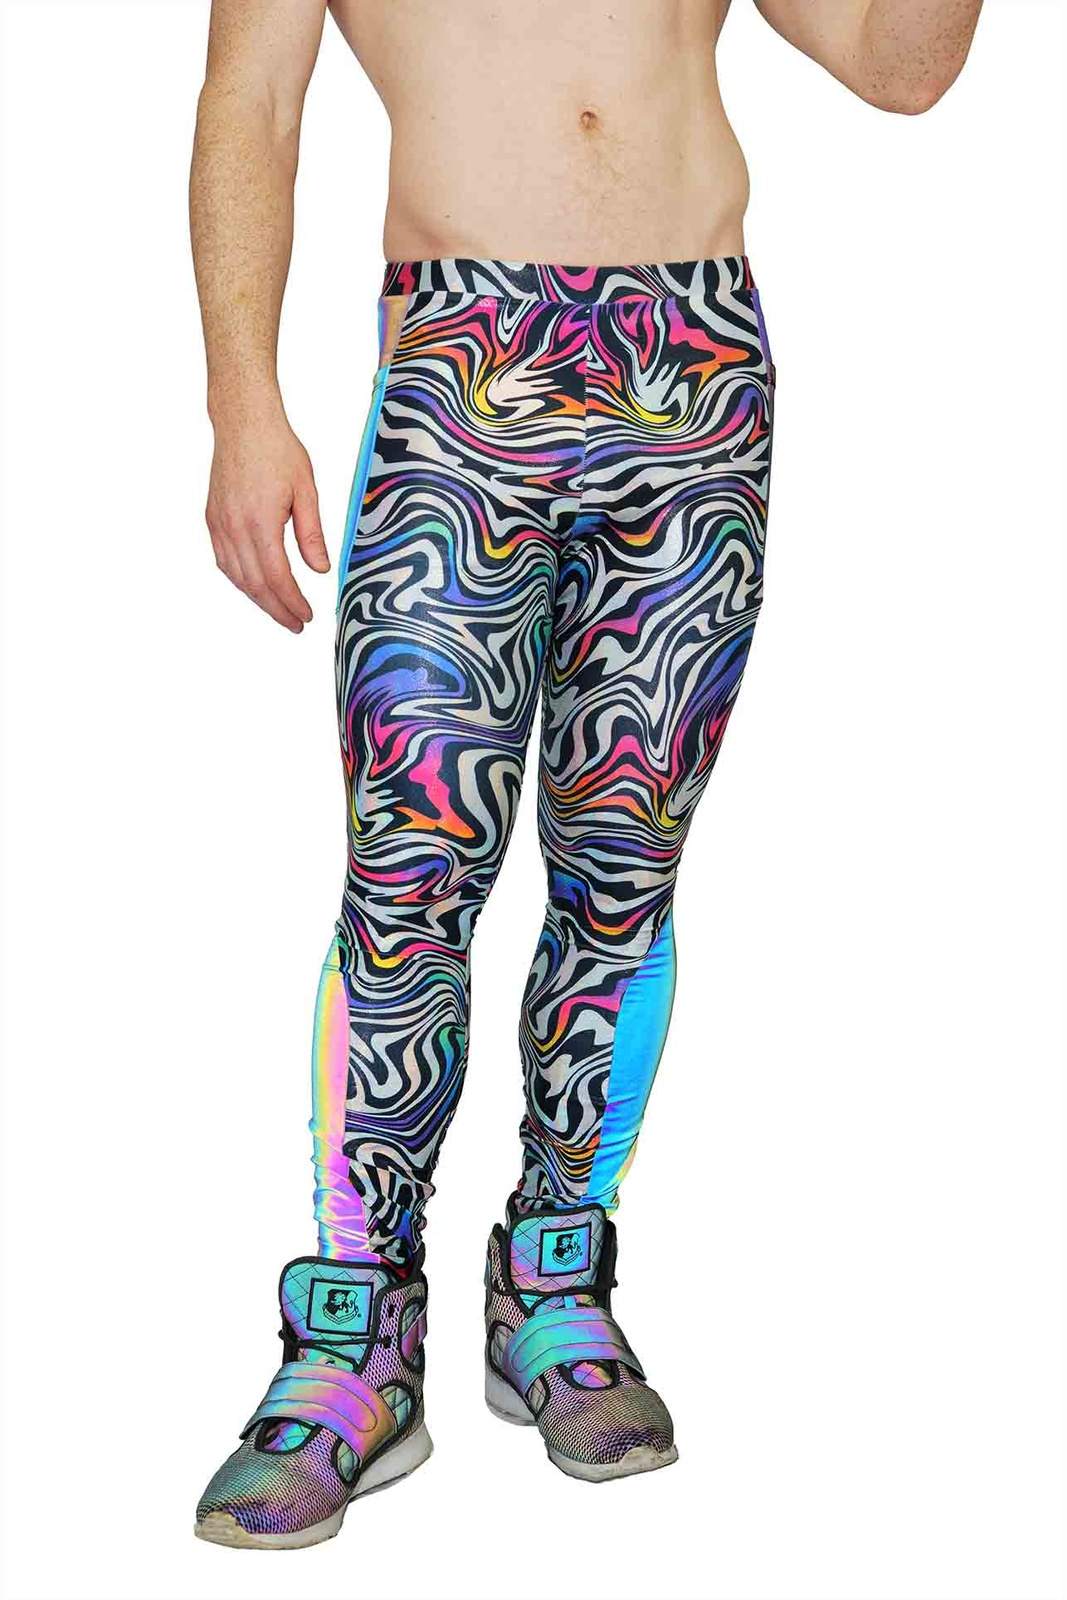 rainbow reflective tights for men from Love Khaos